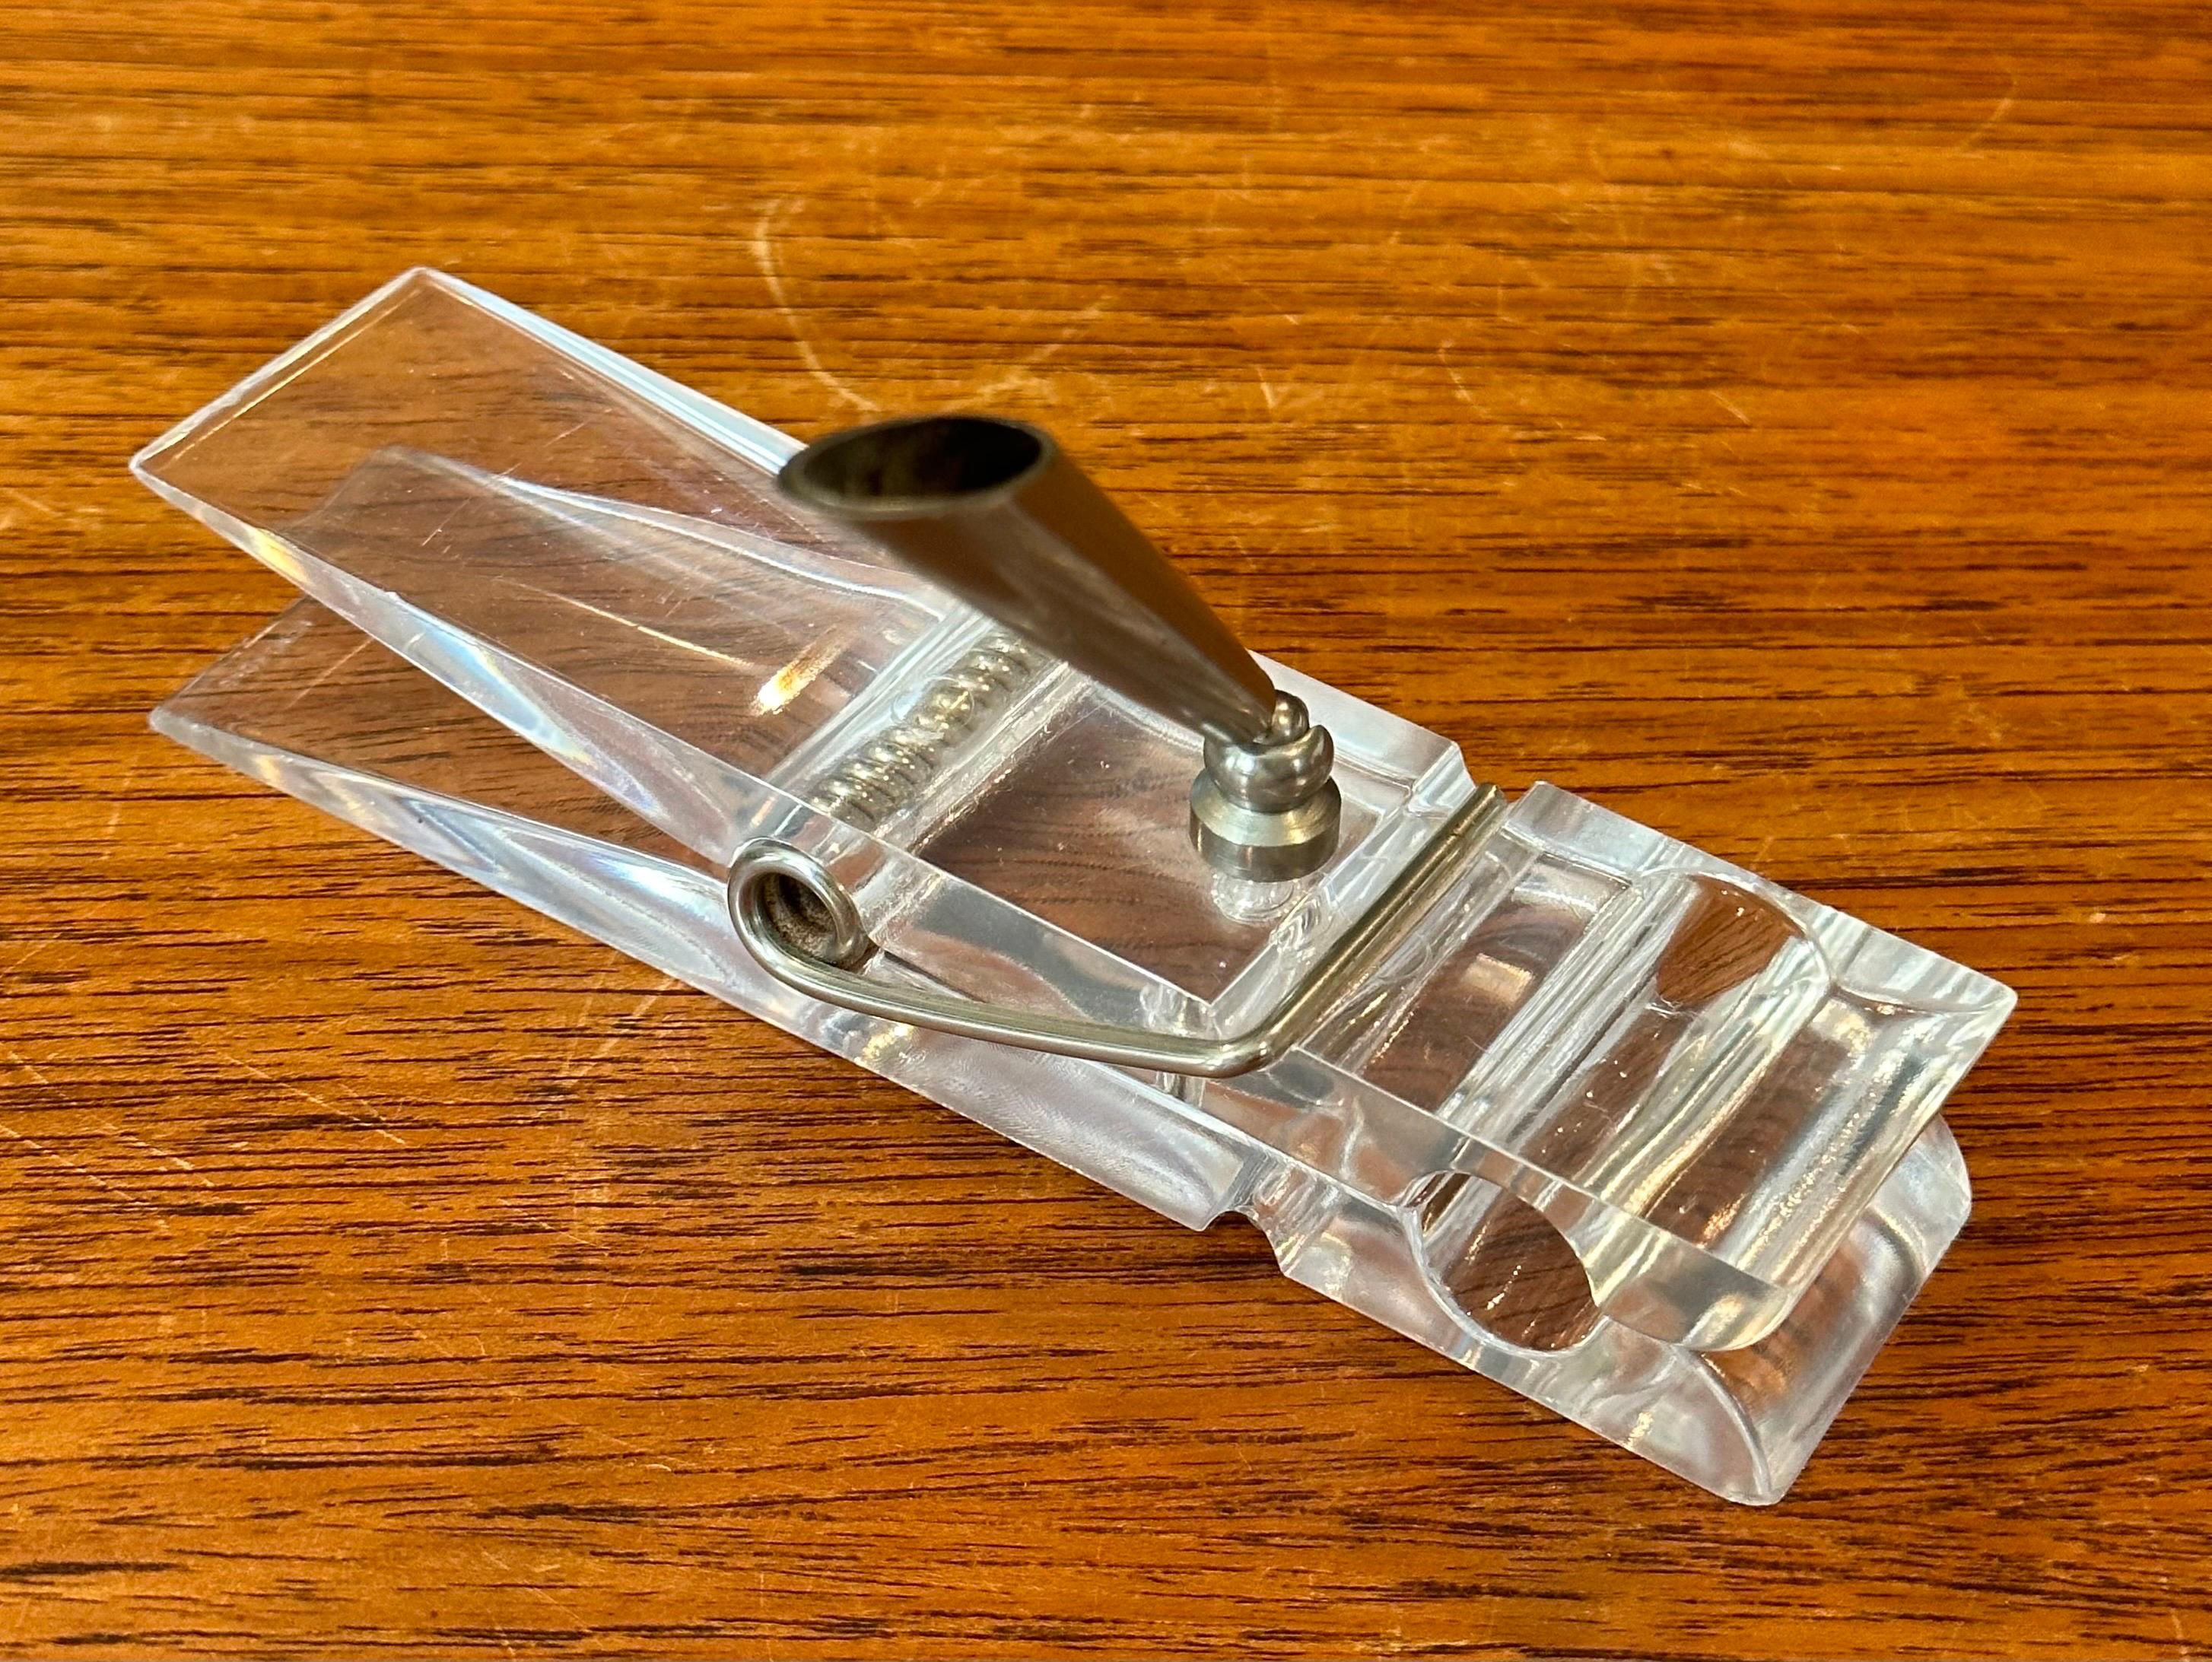 American Oversized Lucite Clothespin Paperweight / Pen Holder / Desk Accessory For Sale